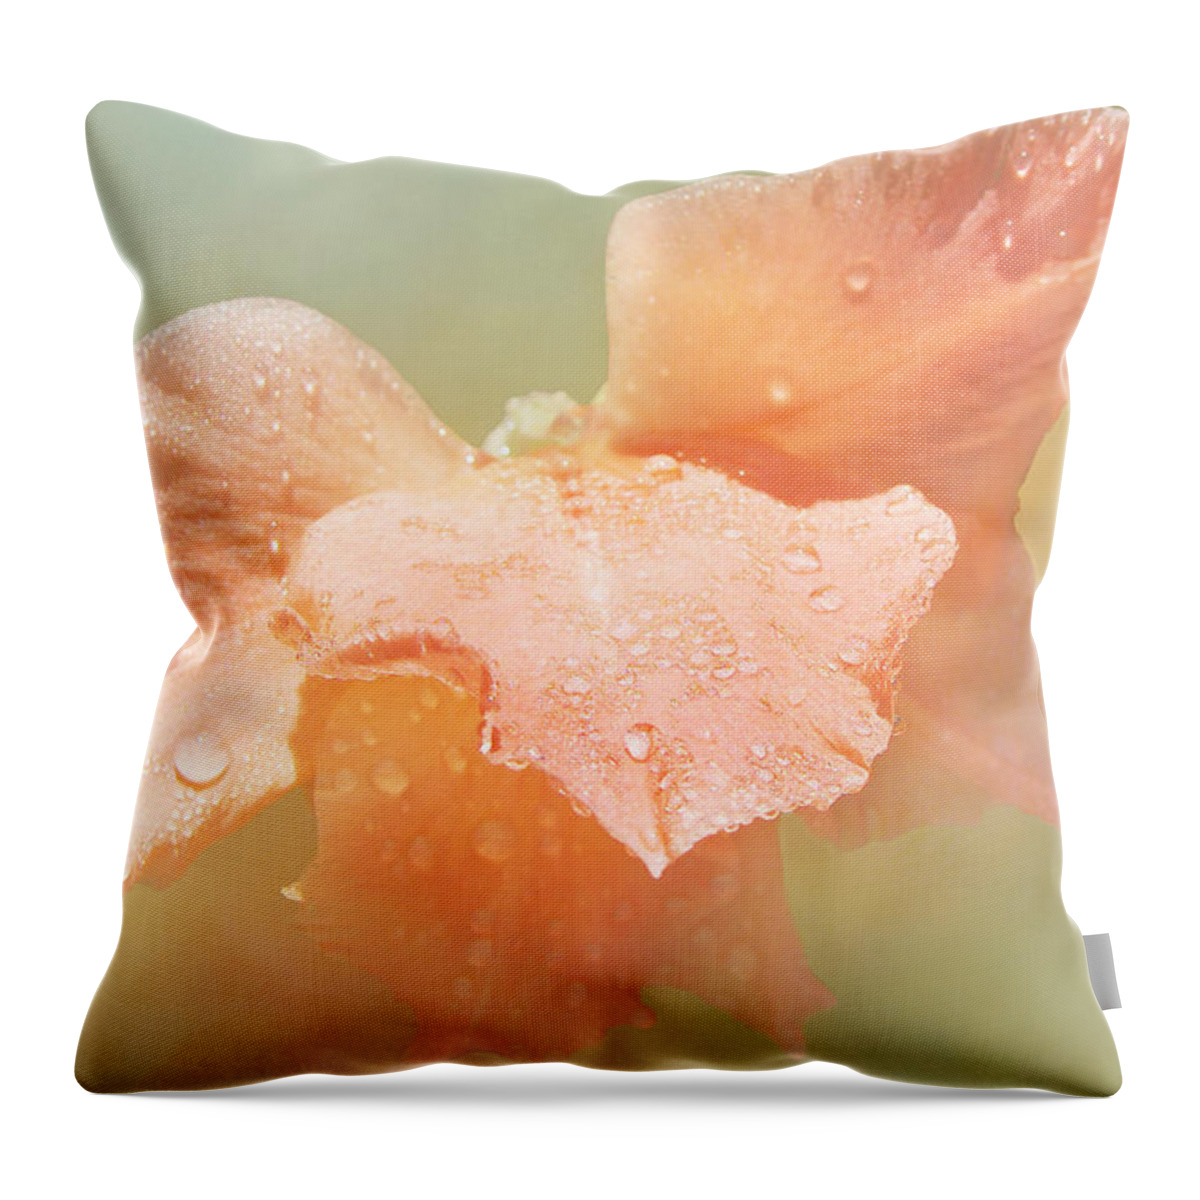 Peach Throw Pillow featuring the photograph Angel Wings by Kathi Mirto